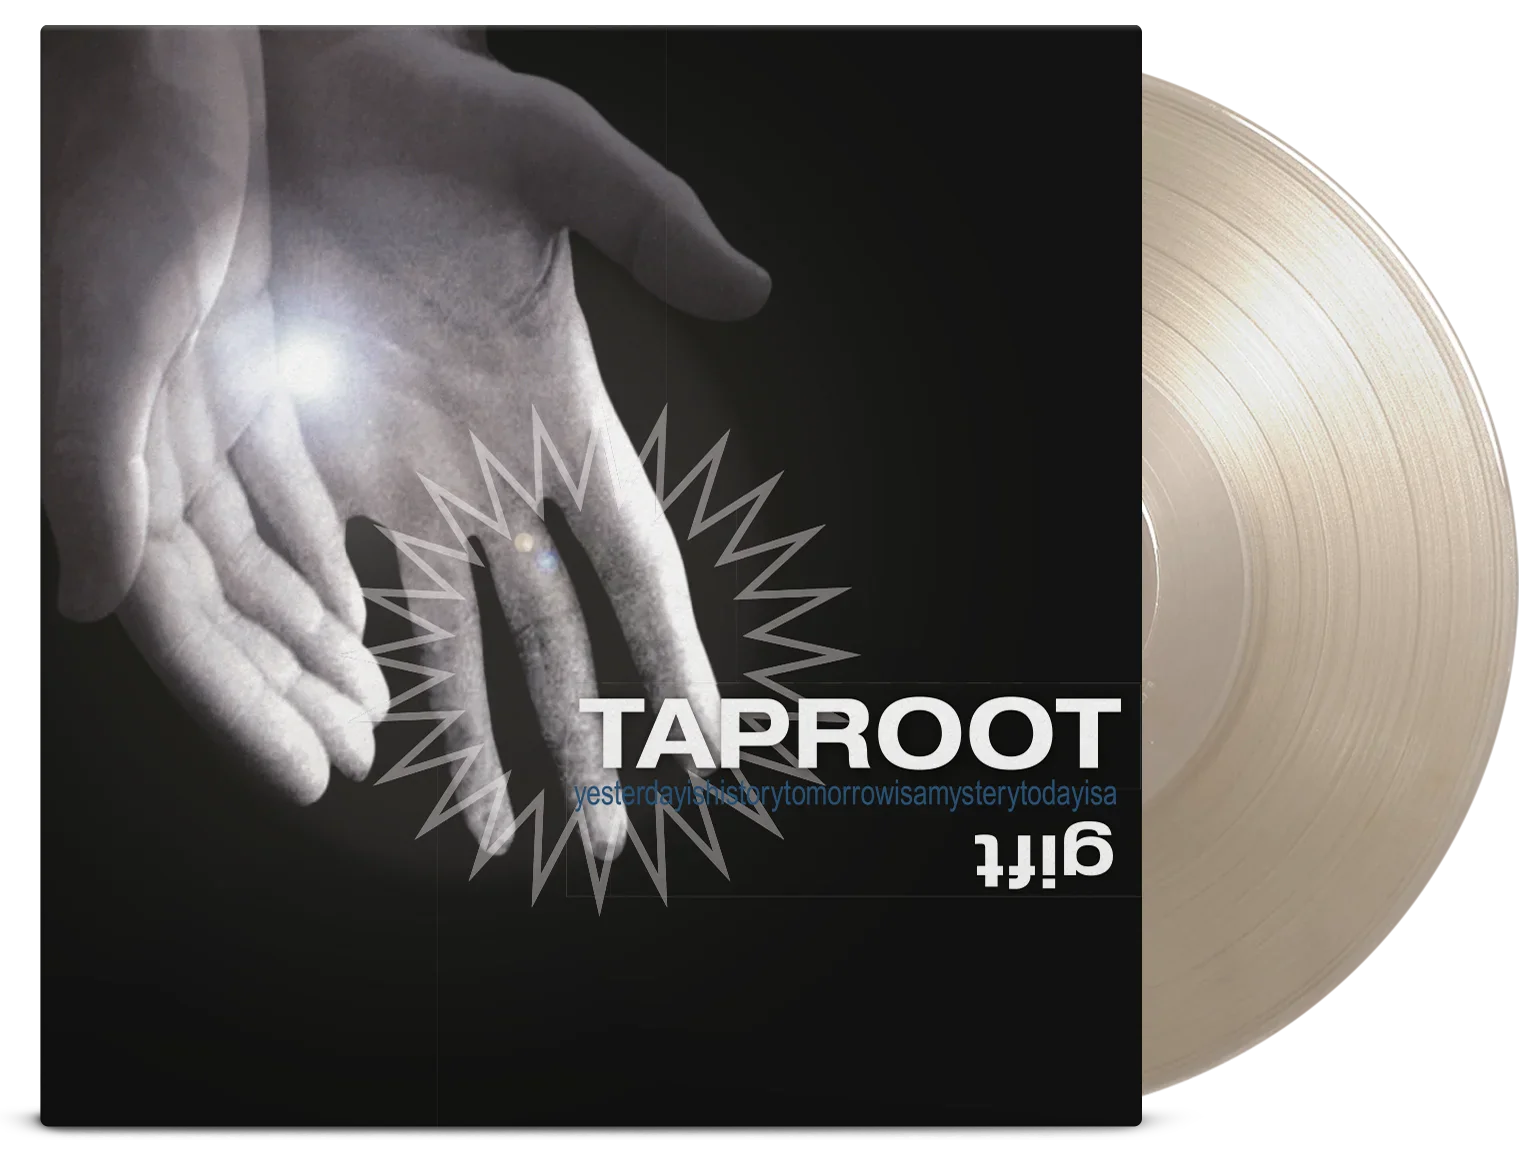 Taproot "Gift" 180g Crystal Clear Vinyl - PRE-ORDER